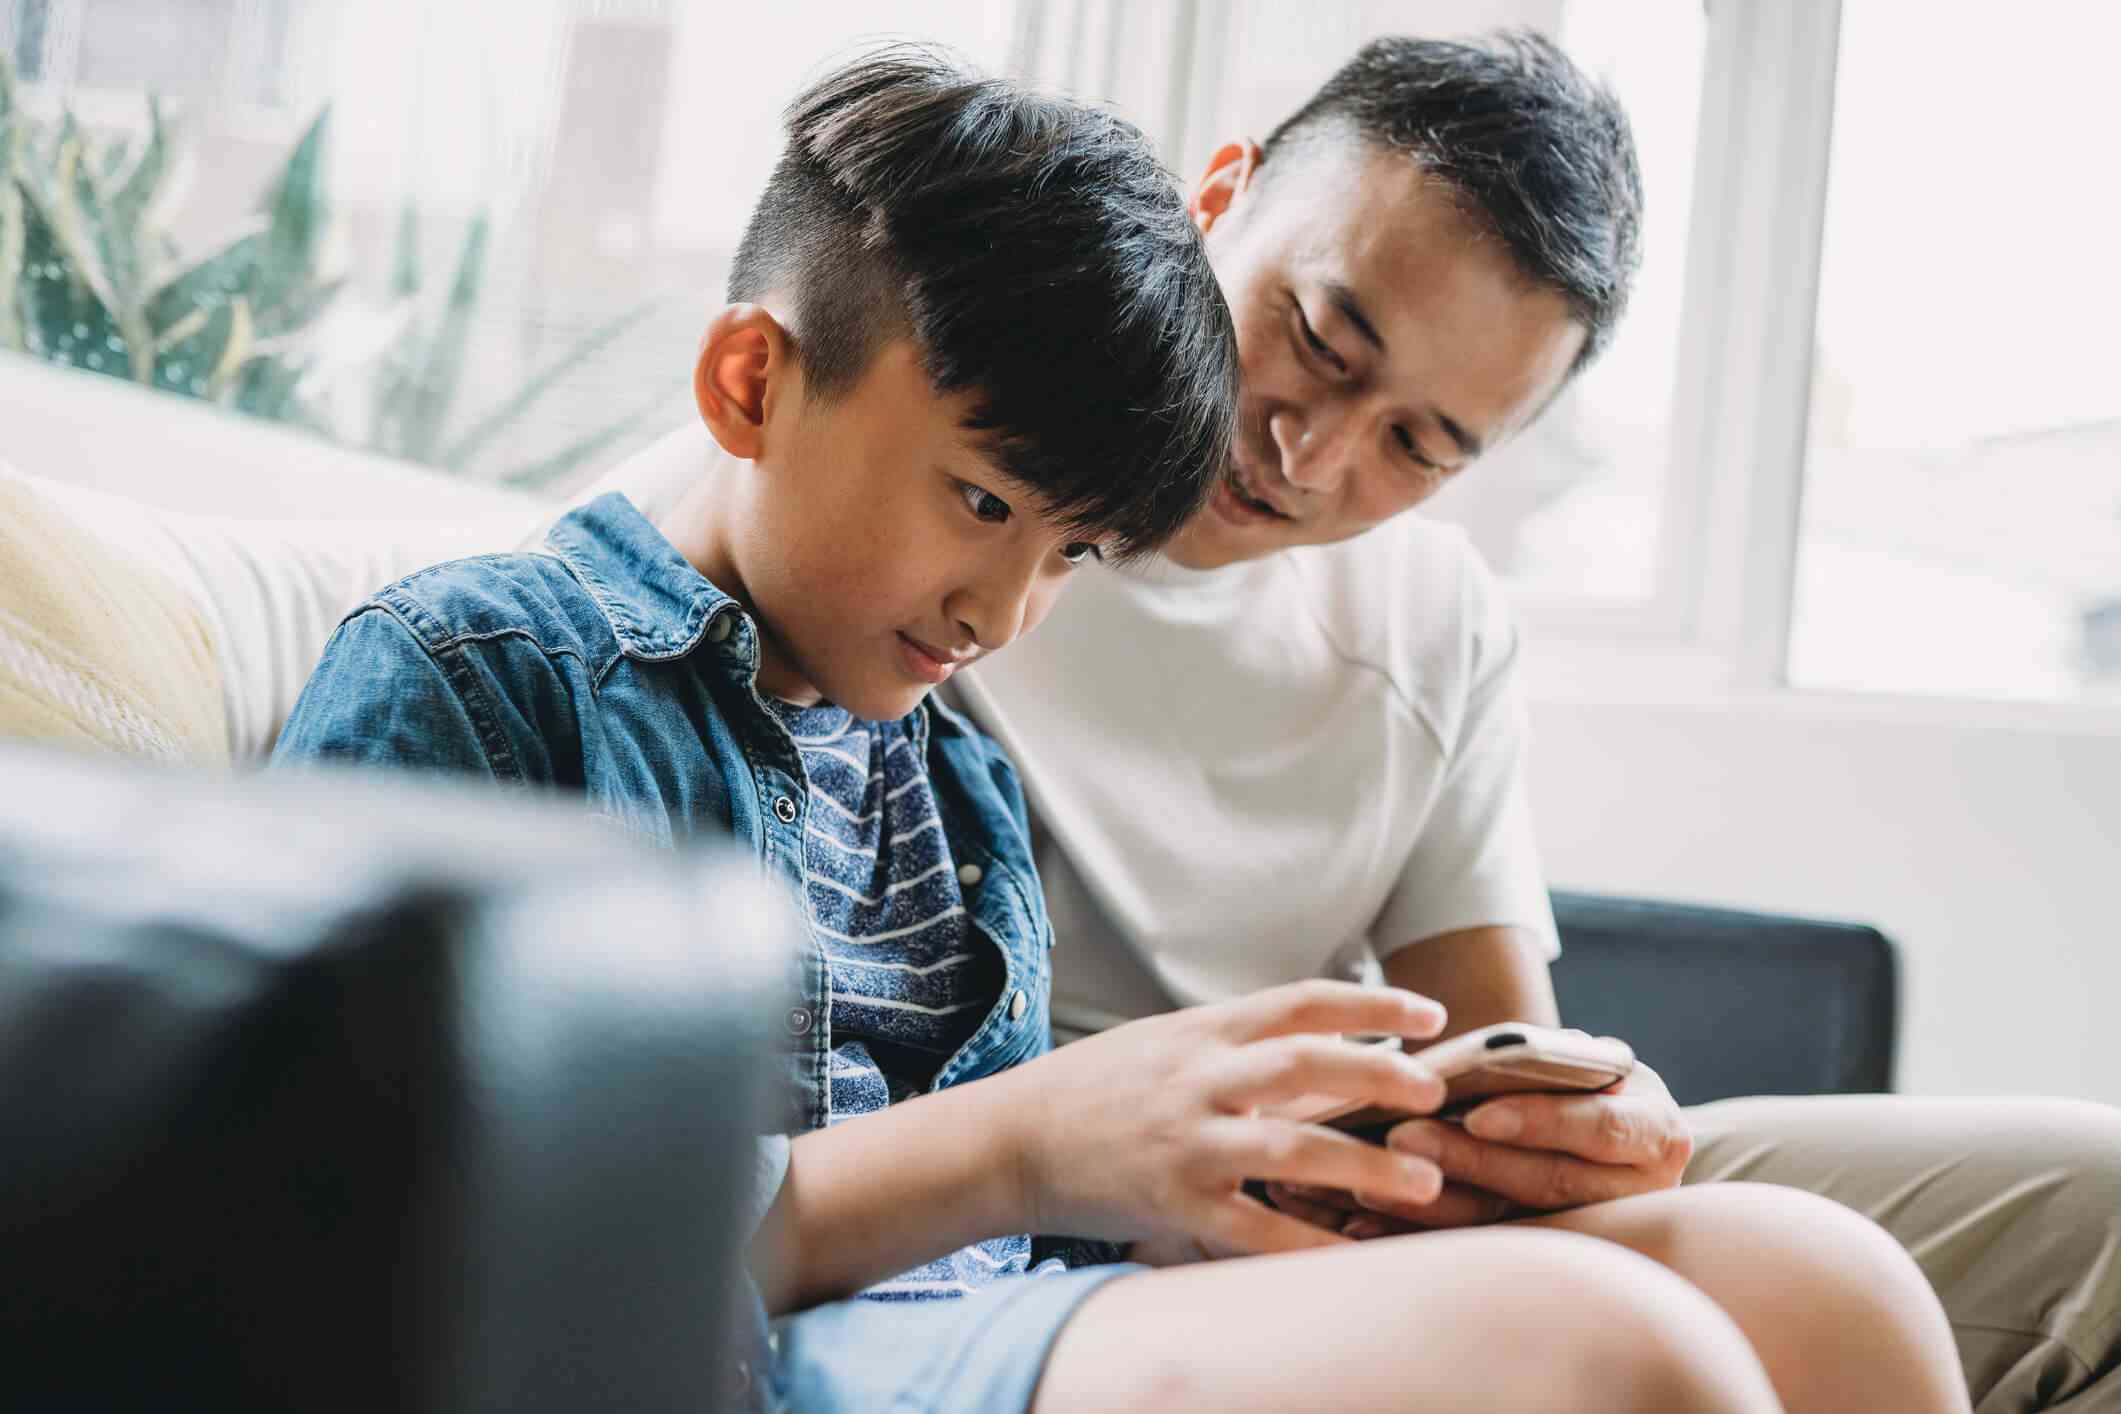 A father and his pre-teen son sit on a couch working together on a cell phone the son is holding; both are smiling. The boy is wearing blue shorts and a blue-and-white striped t-shirt under a jean jacket, and the father is wearing a white t-shirt and tan pants.